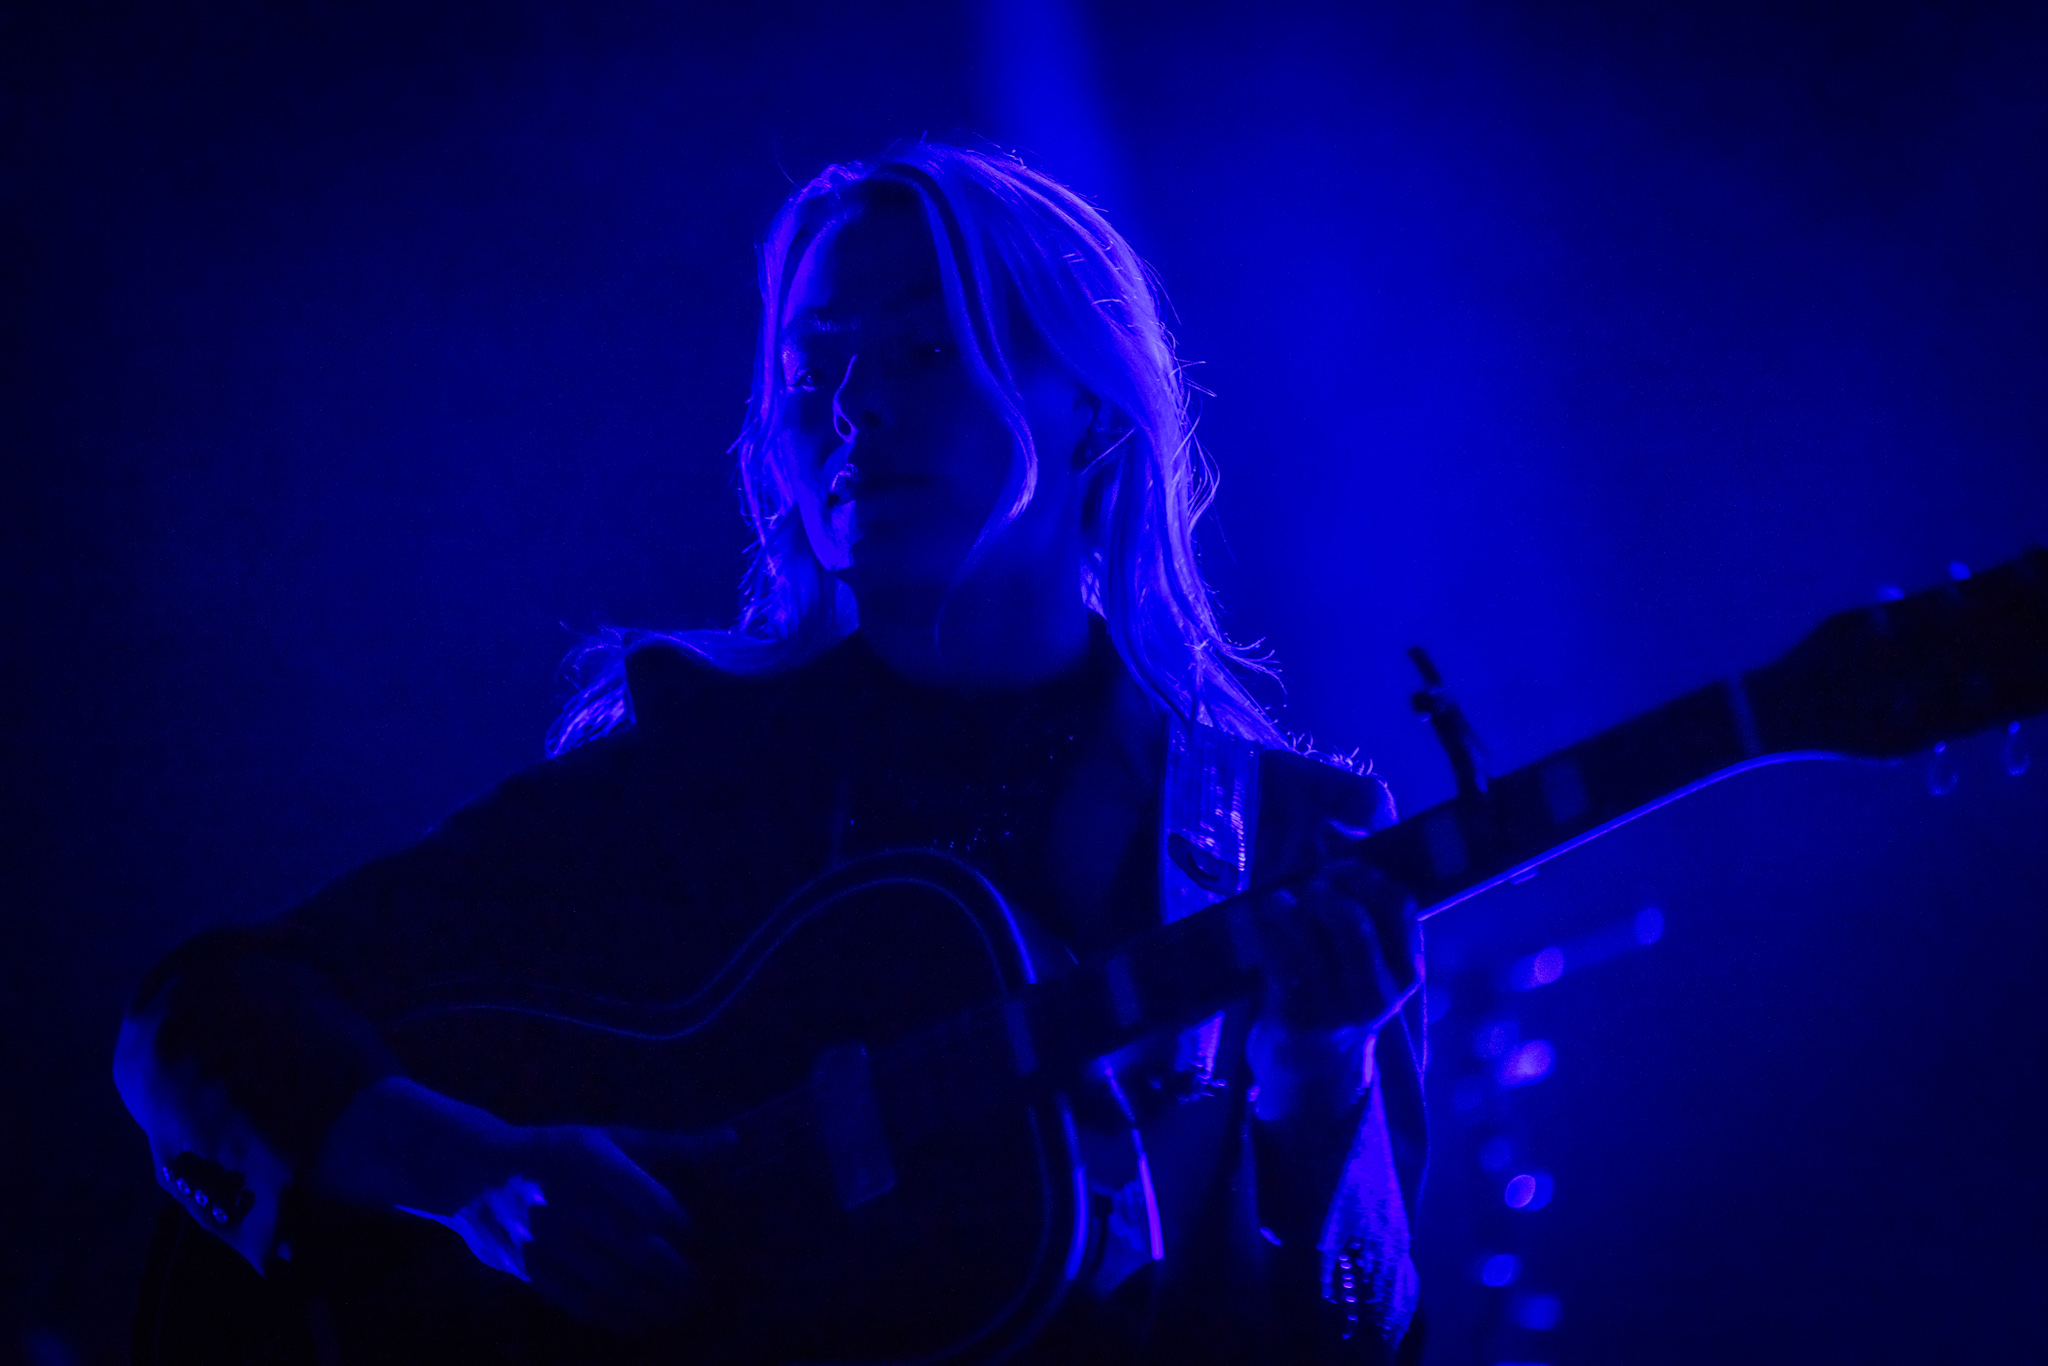 Phoebe Bridgers by Bullet-ray Photography